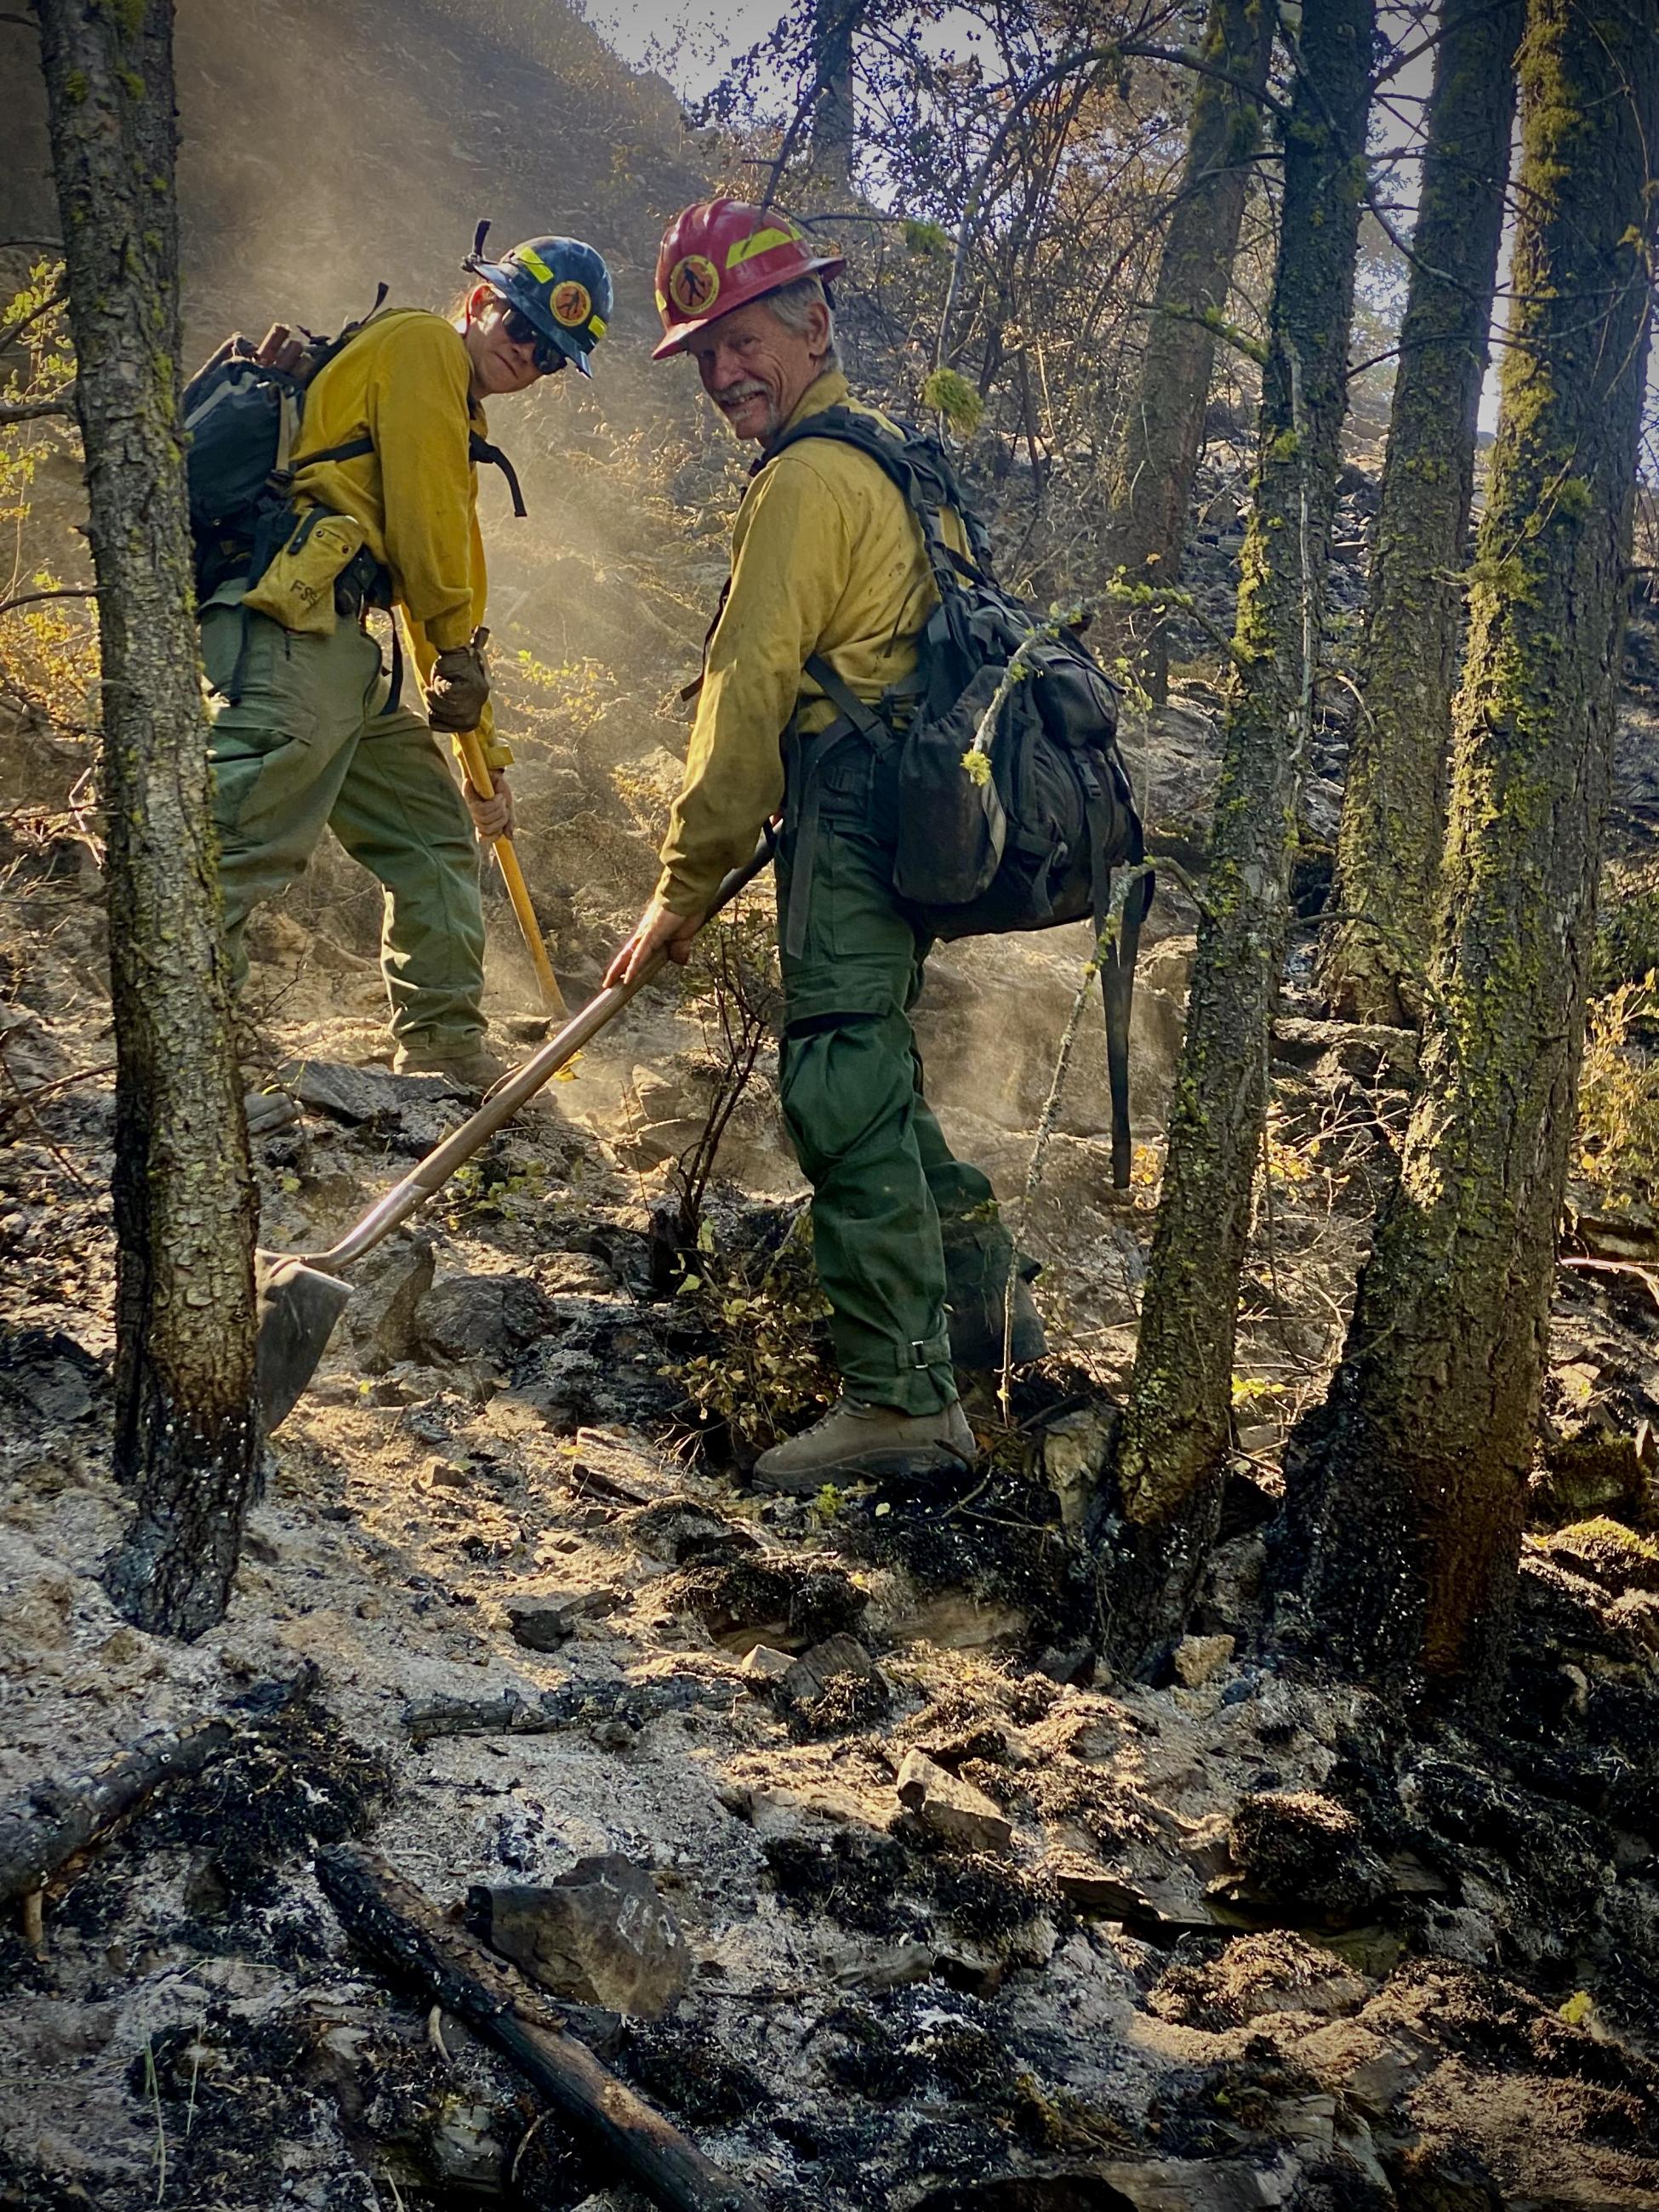 Father and Son First fire passing the Torch! Mop up off Steep Mountain Rd near blue lake